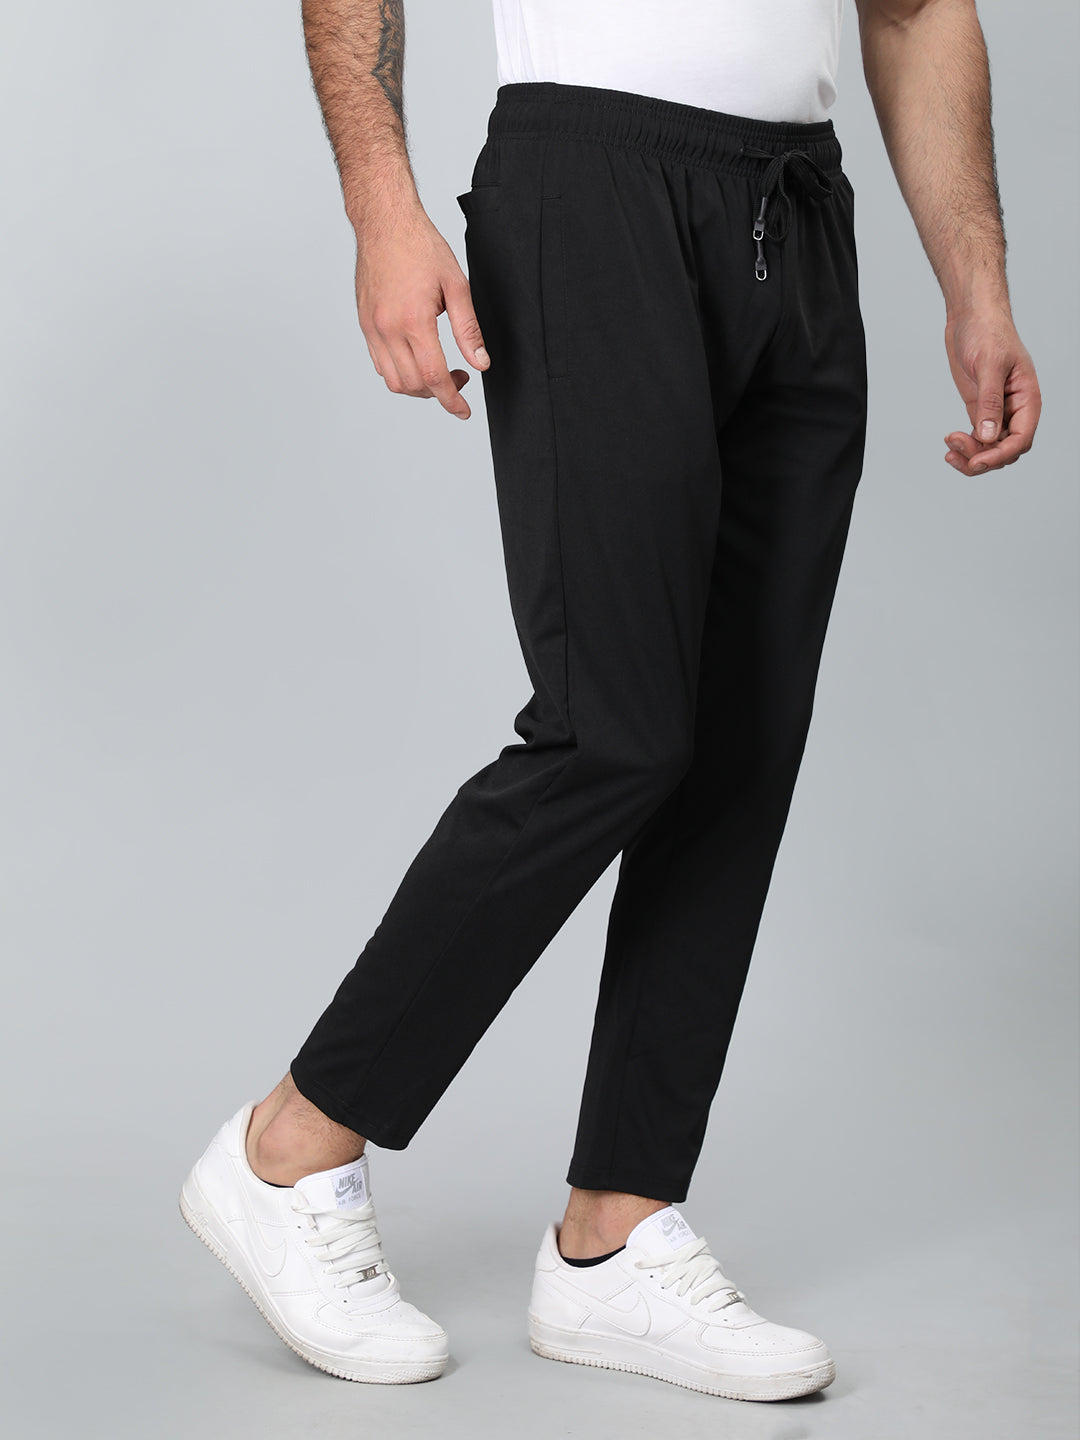 Men Sports Gym Trackpant Running Lower With Pocket | CHKOKKO